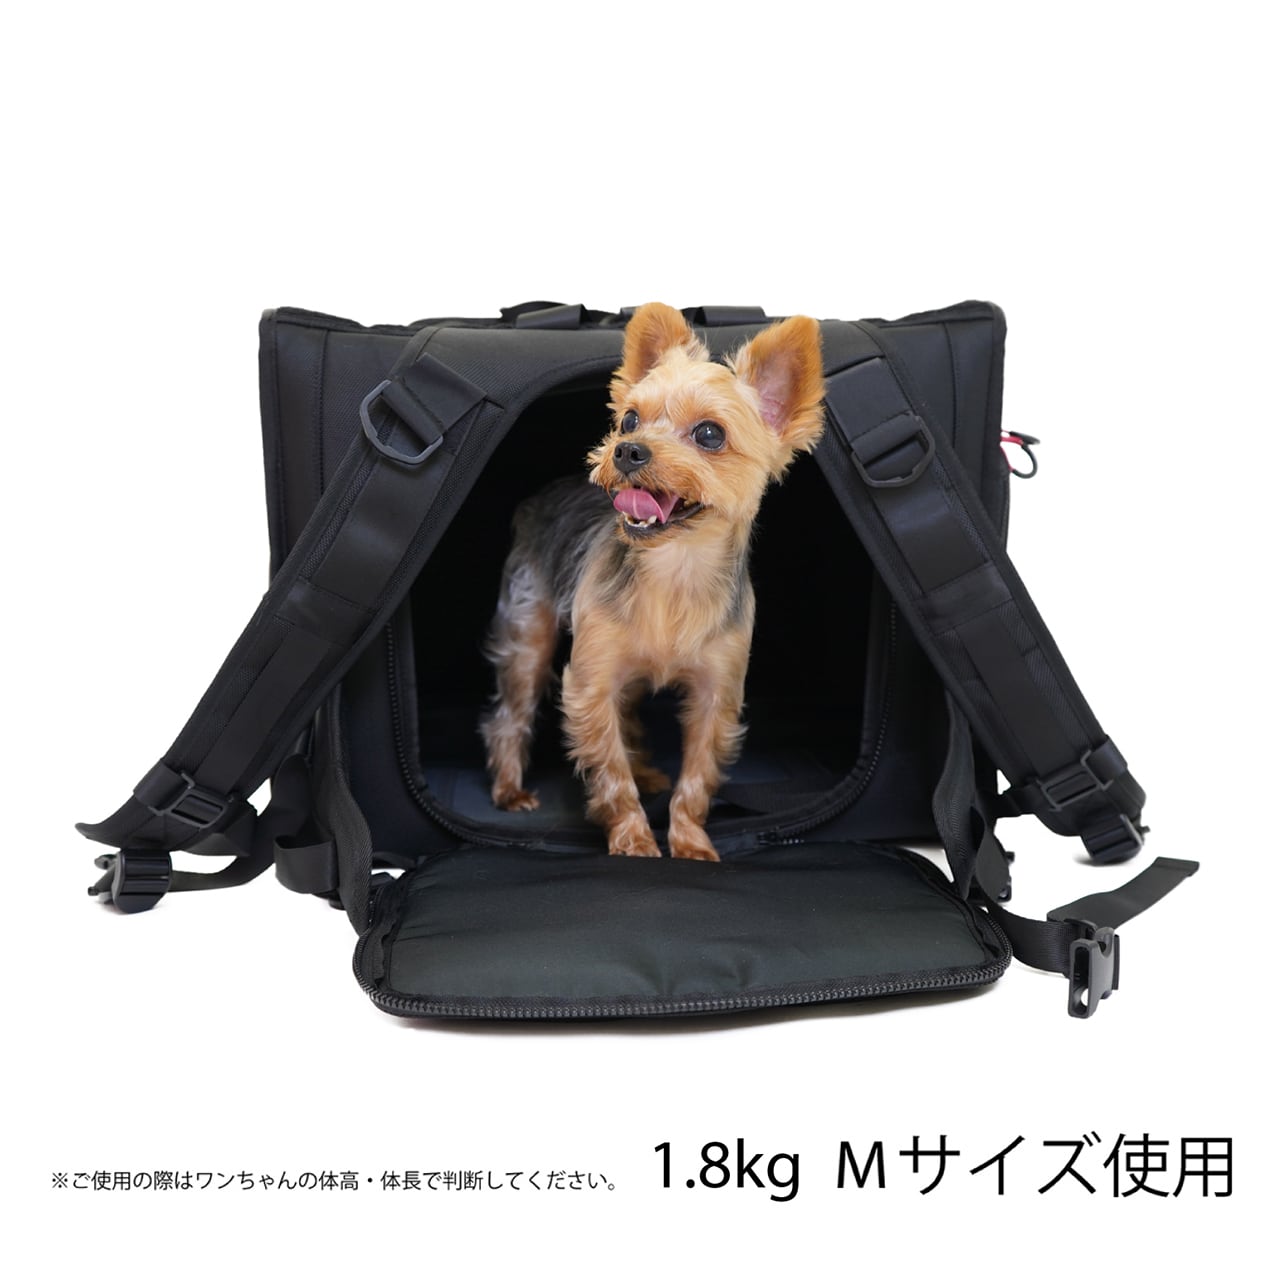 BRIXTON CARRY BACKPACK −WIDE−（M）ブリクストンキャリーバック 